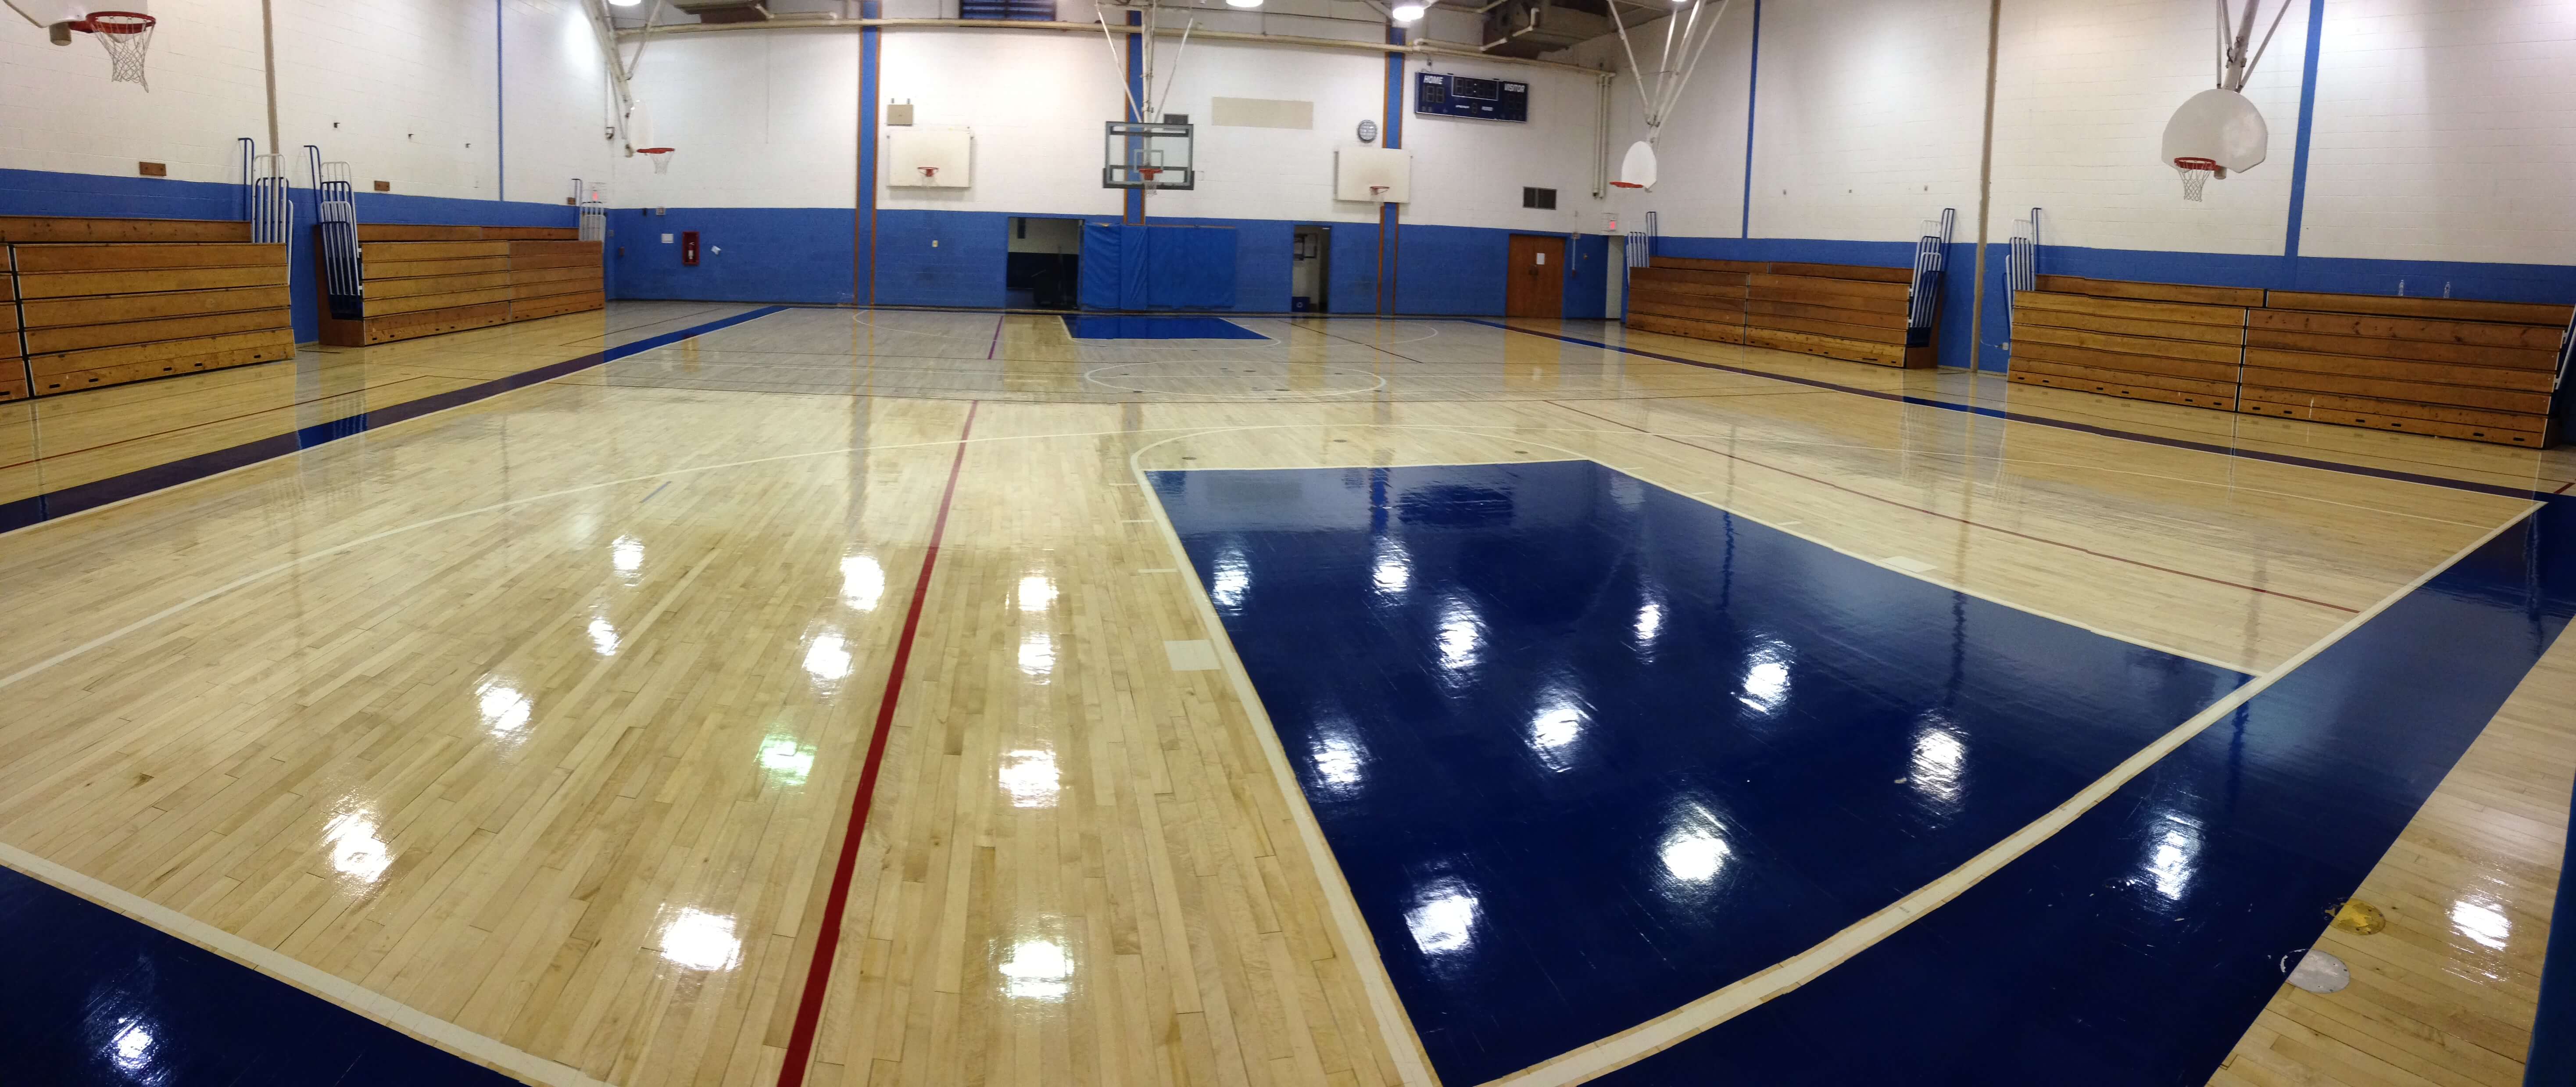 How To Clean A Wood Gym Floor? 